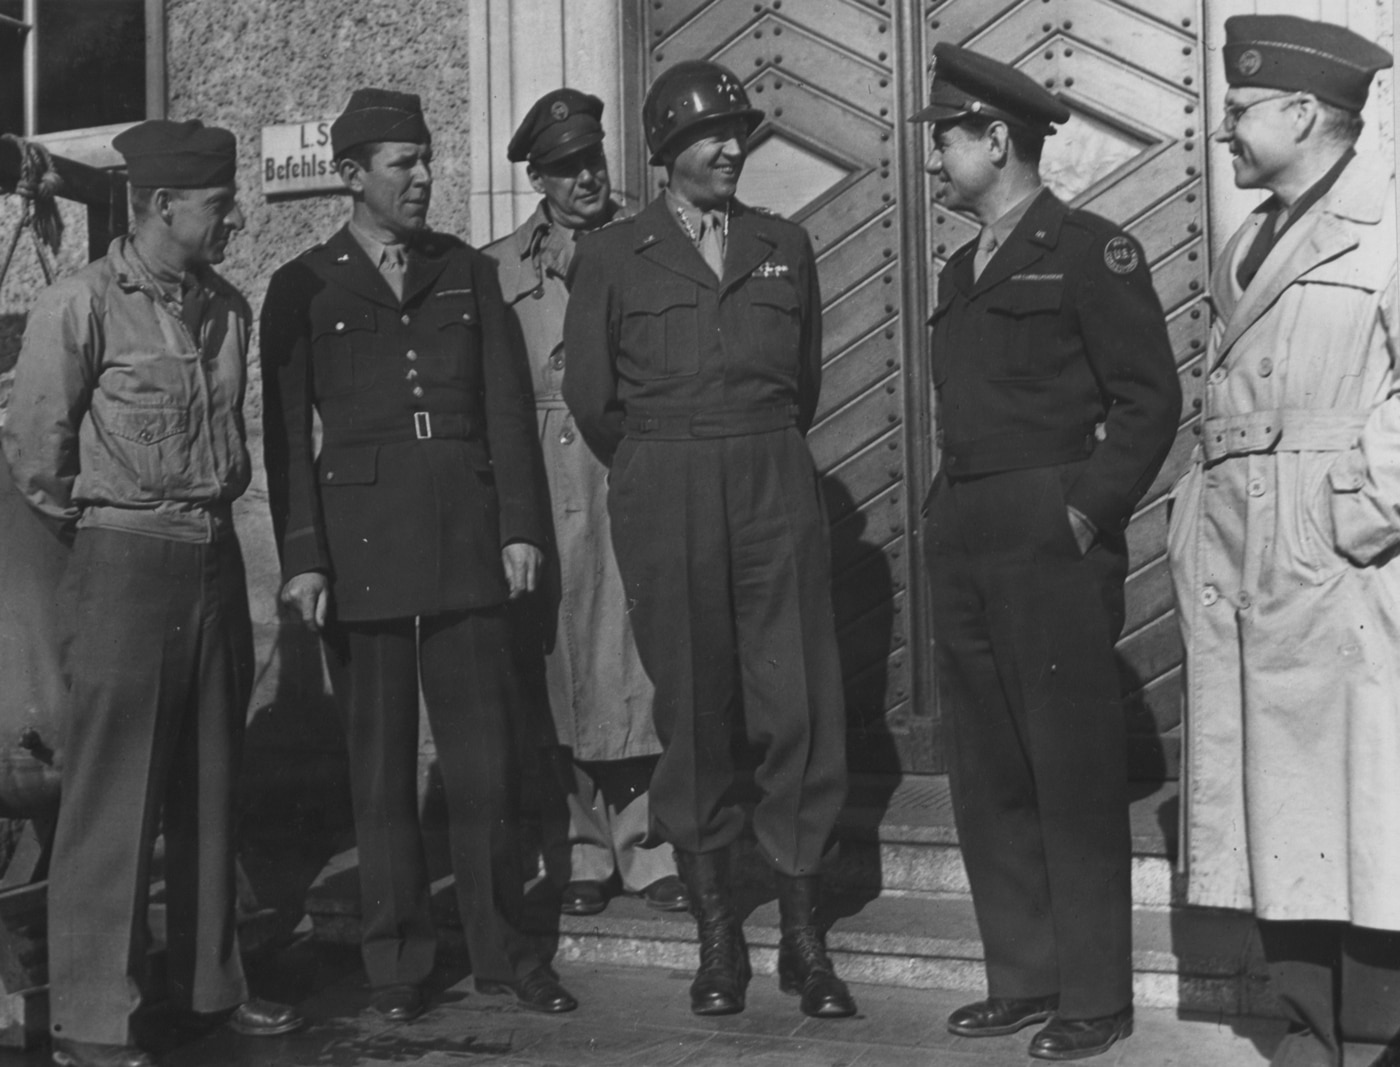 In this photo, Gen Patton talks with radio operators and correspondents from the U.S. media.